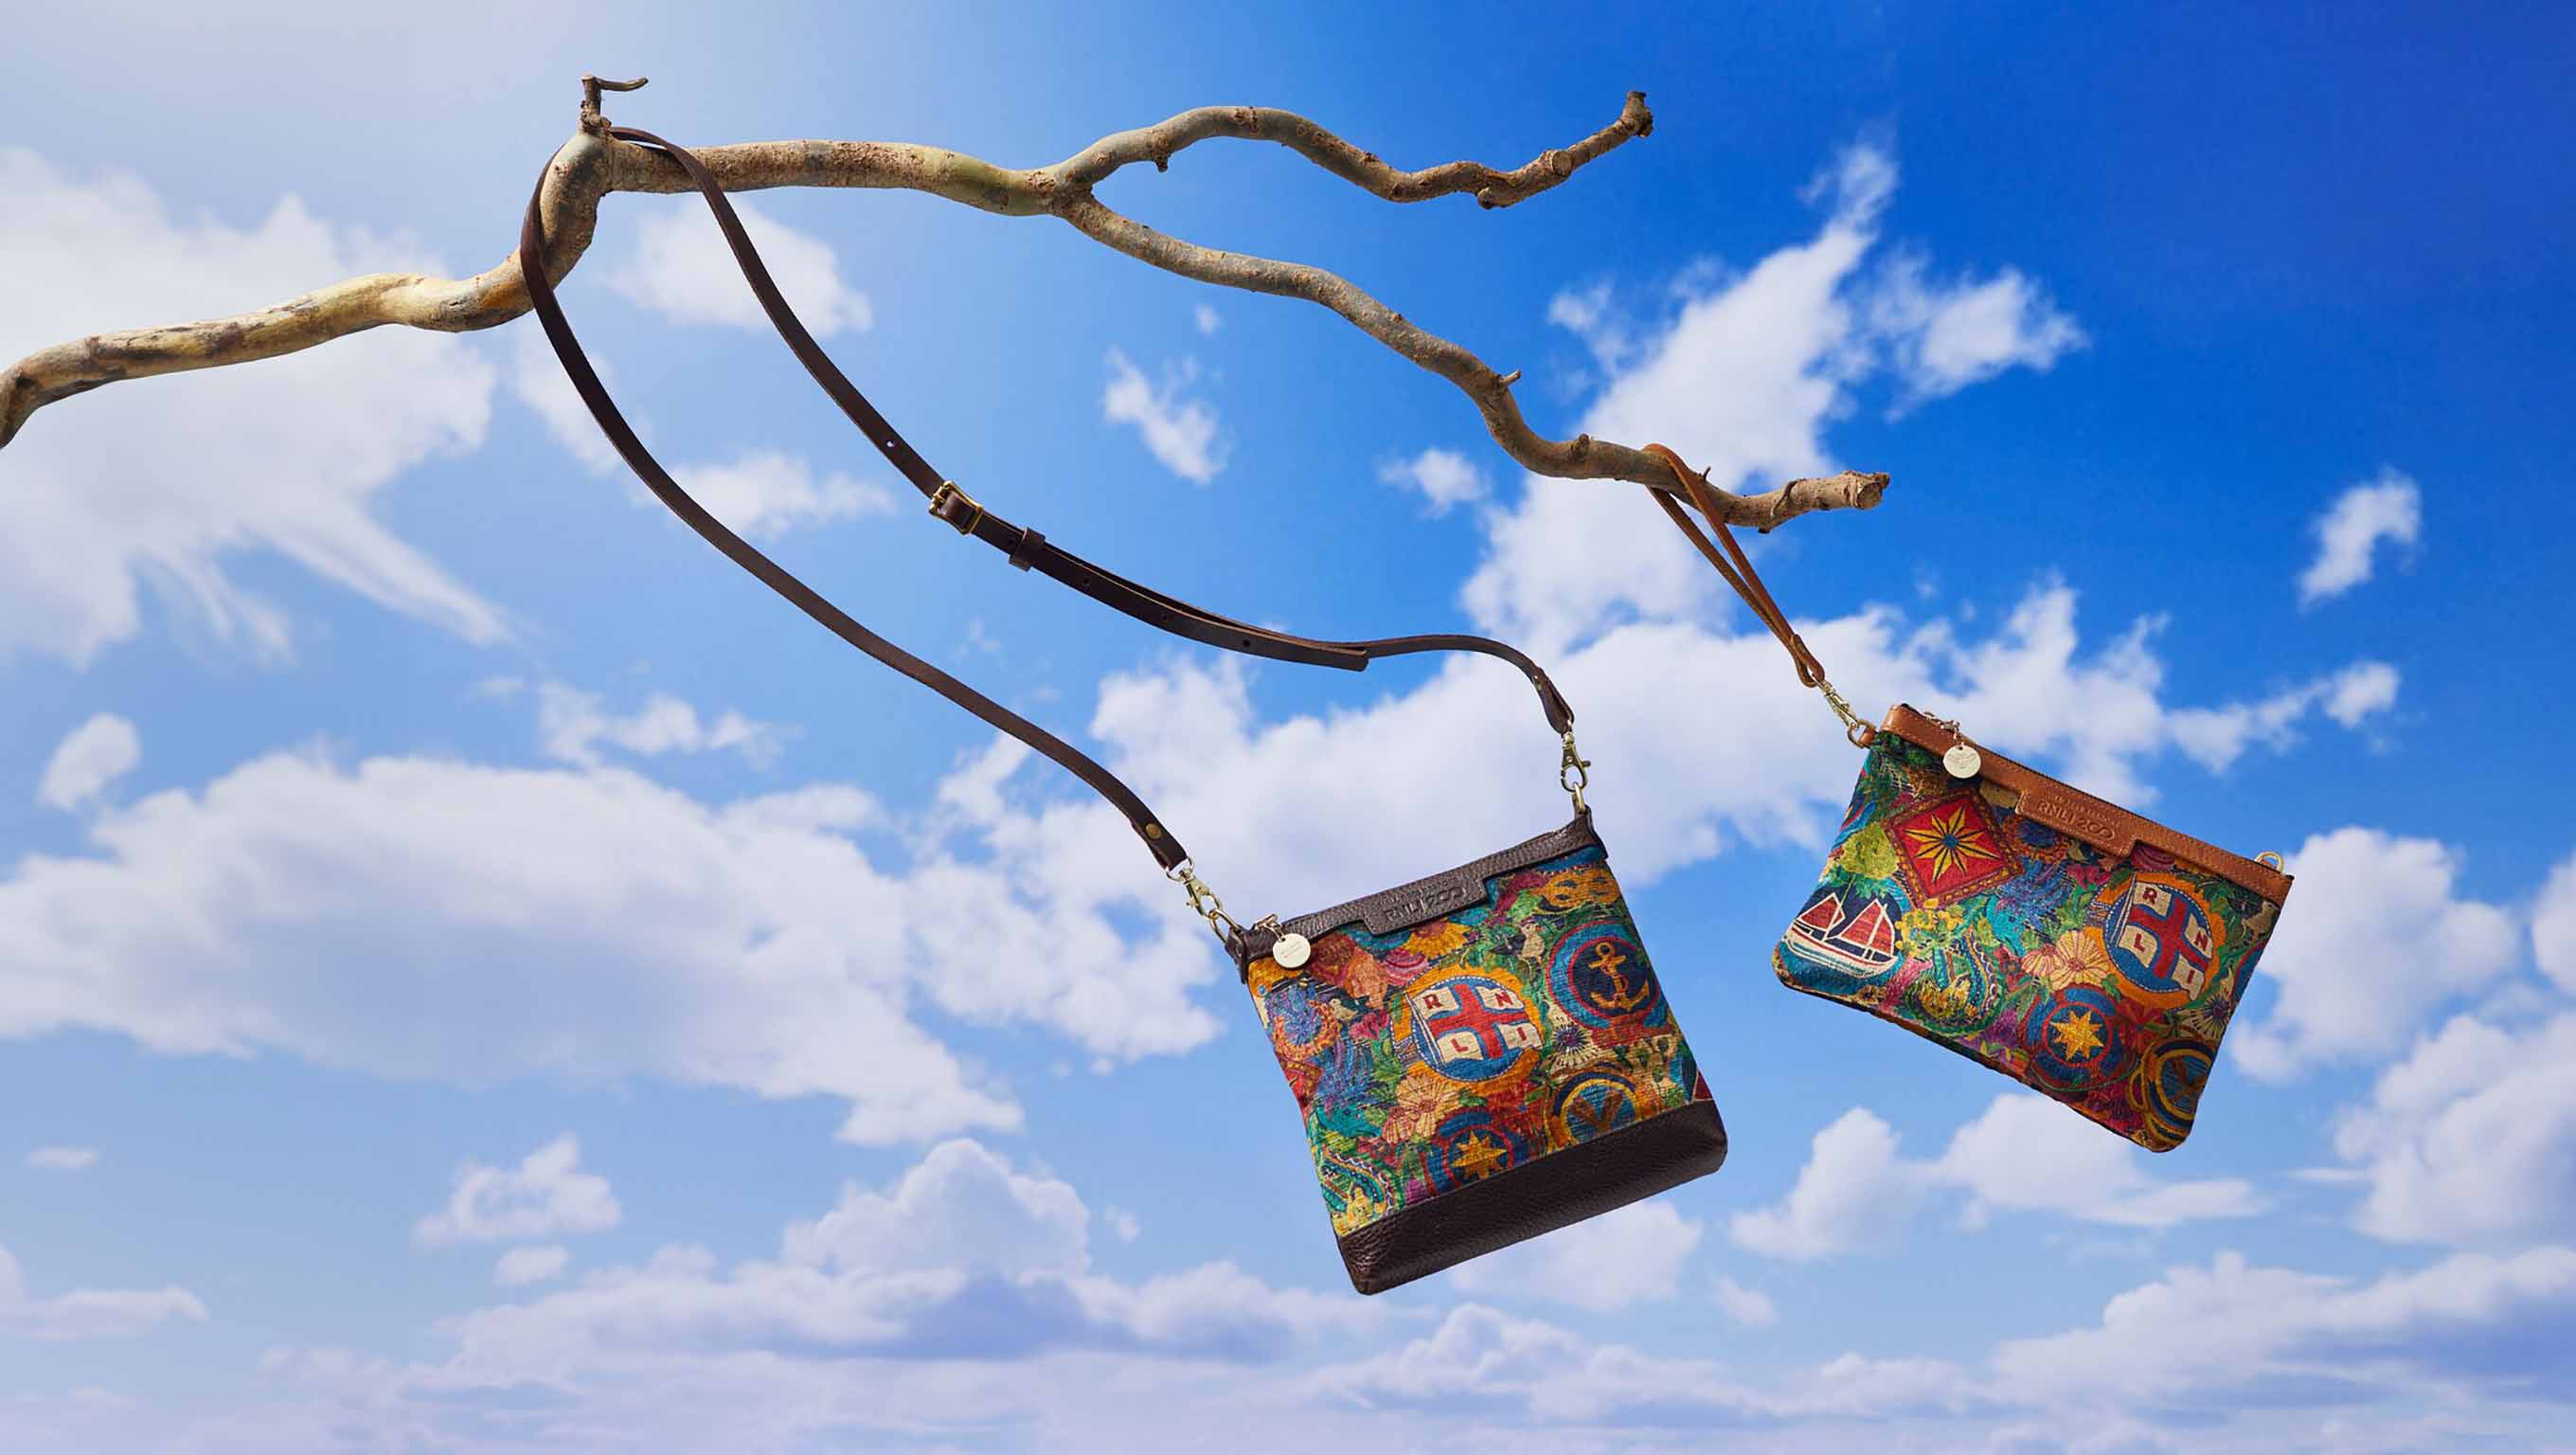 Two clutch bags featuring colourful RNLI designs are hanging from a tree branch and swinging in the wind, with blue sky and clouds in the background.